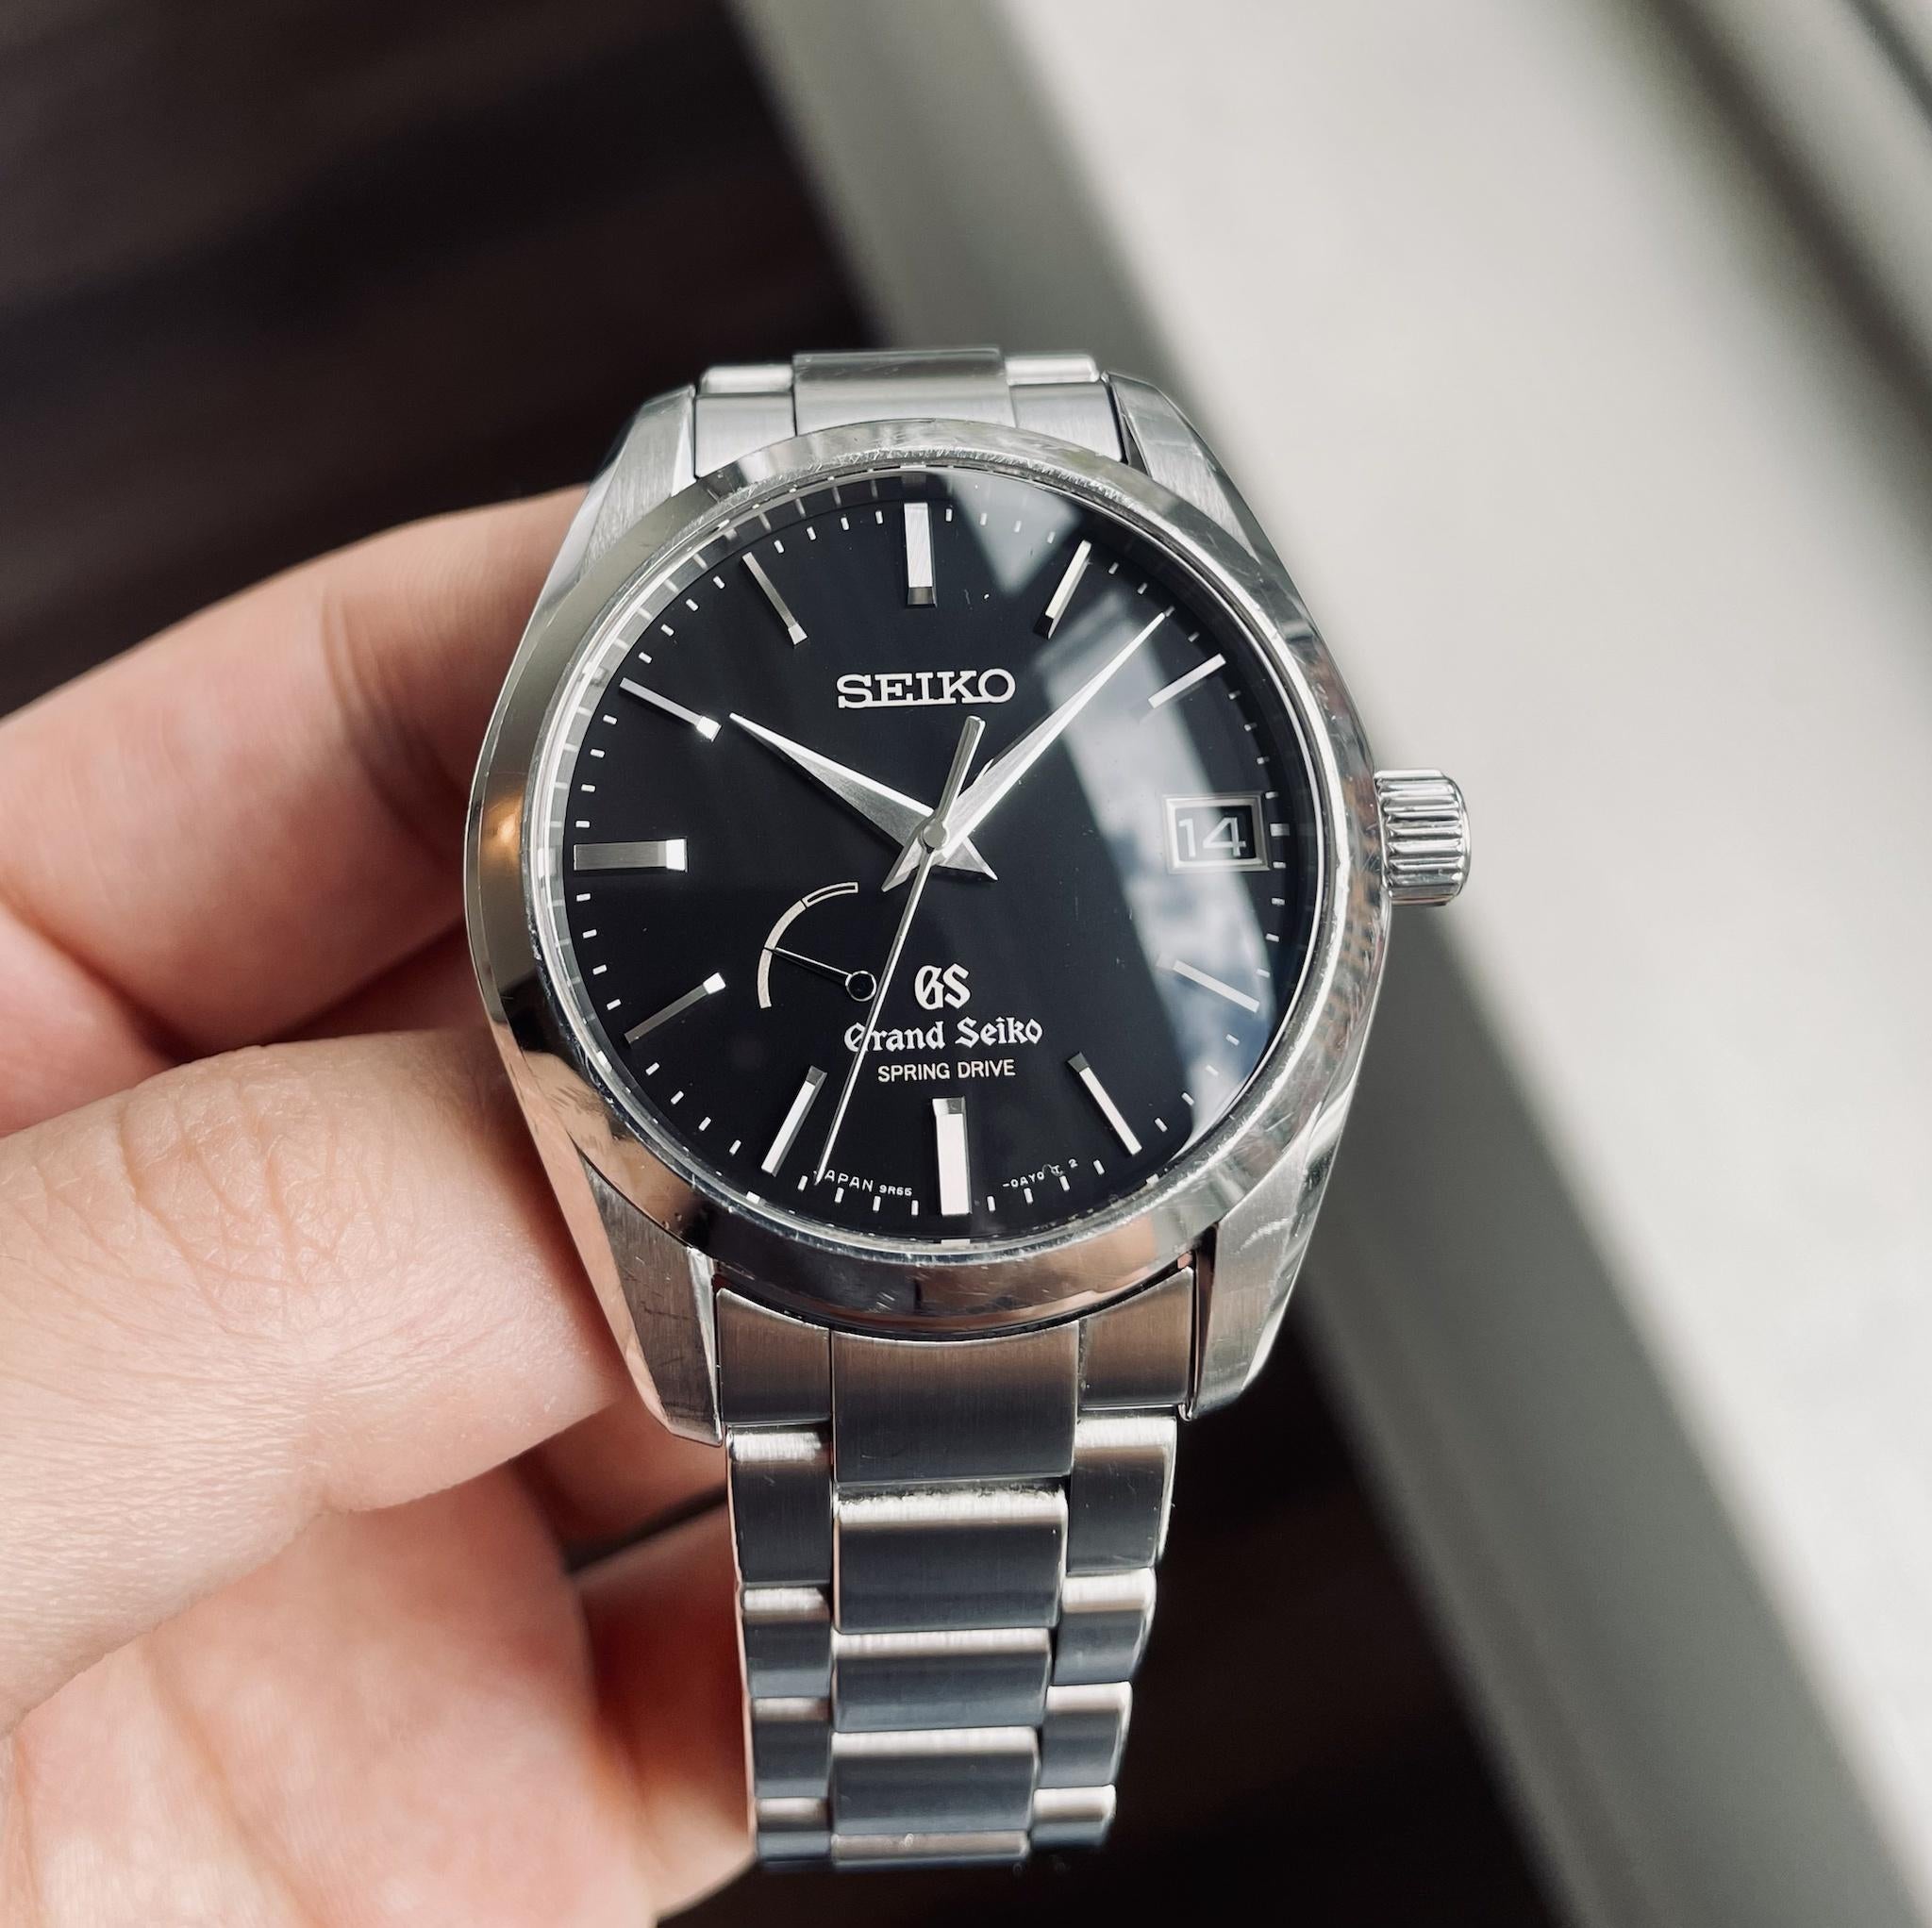 WTS] Grand Seiko SBGA085 (great price to get into spring drive) |  WatchCharts